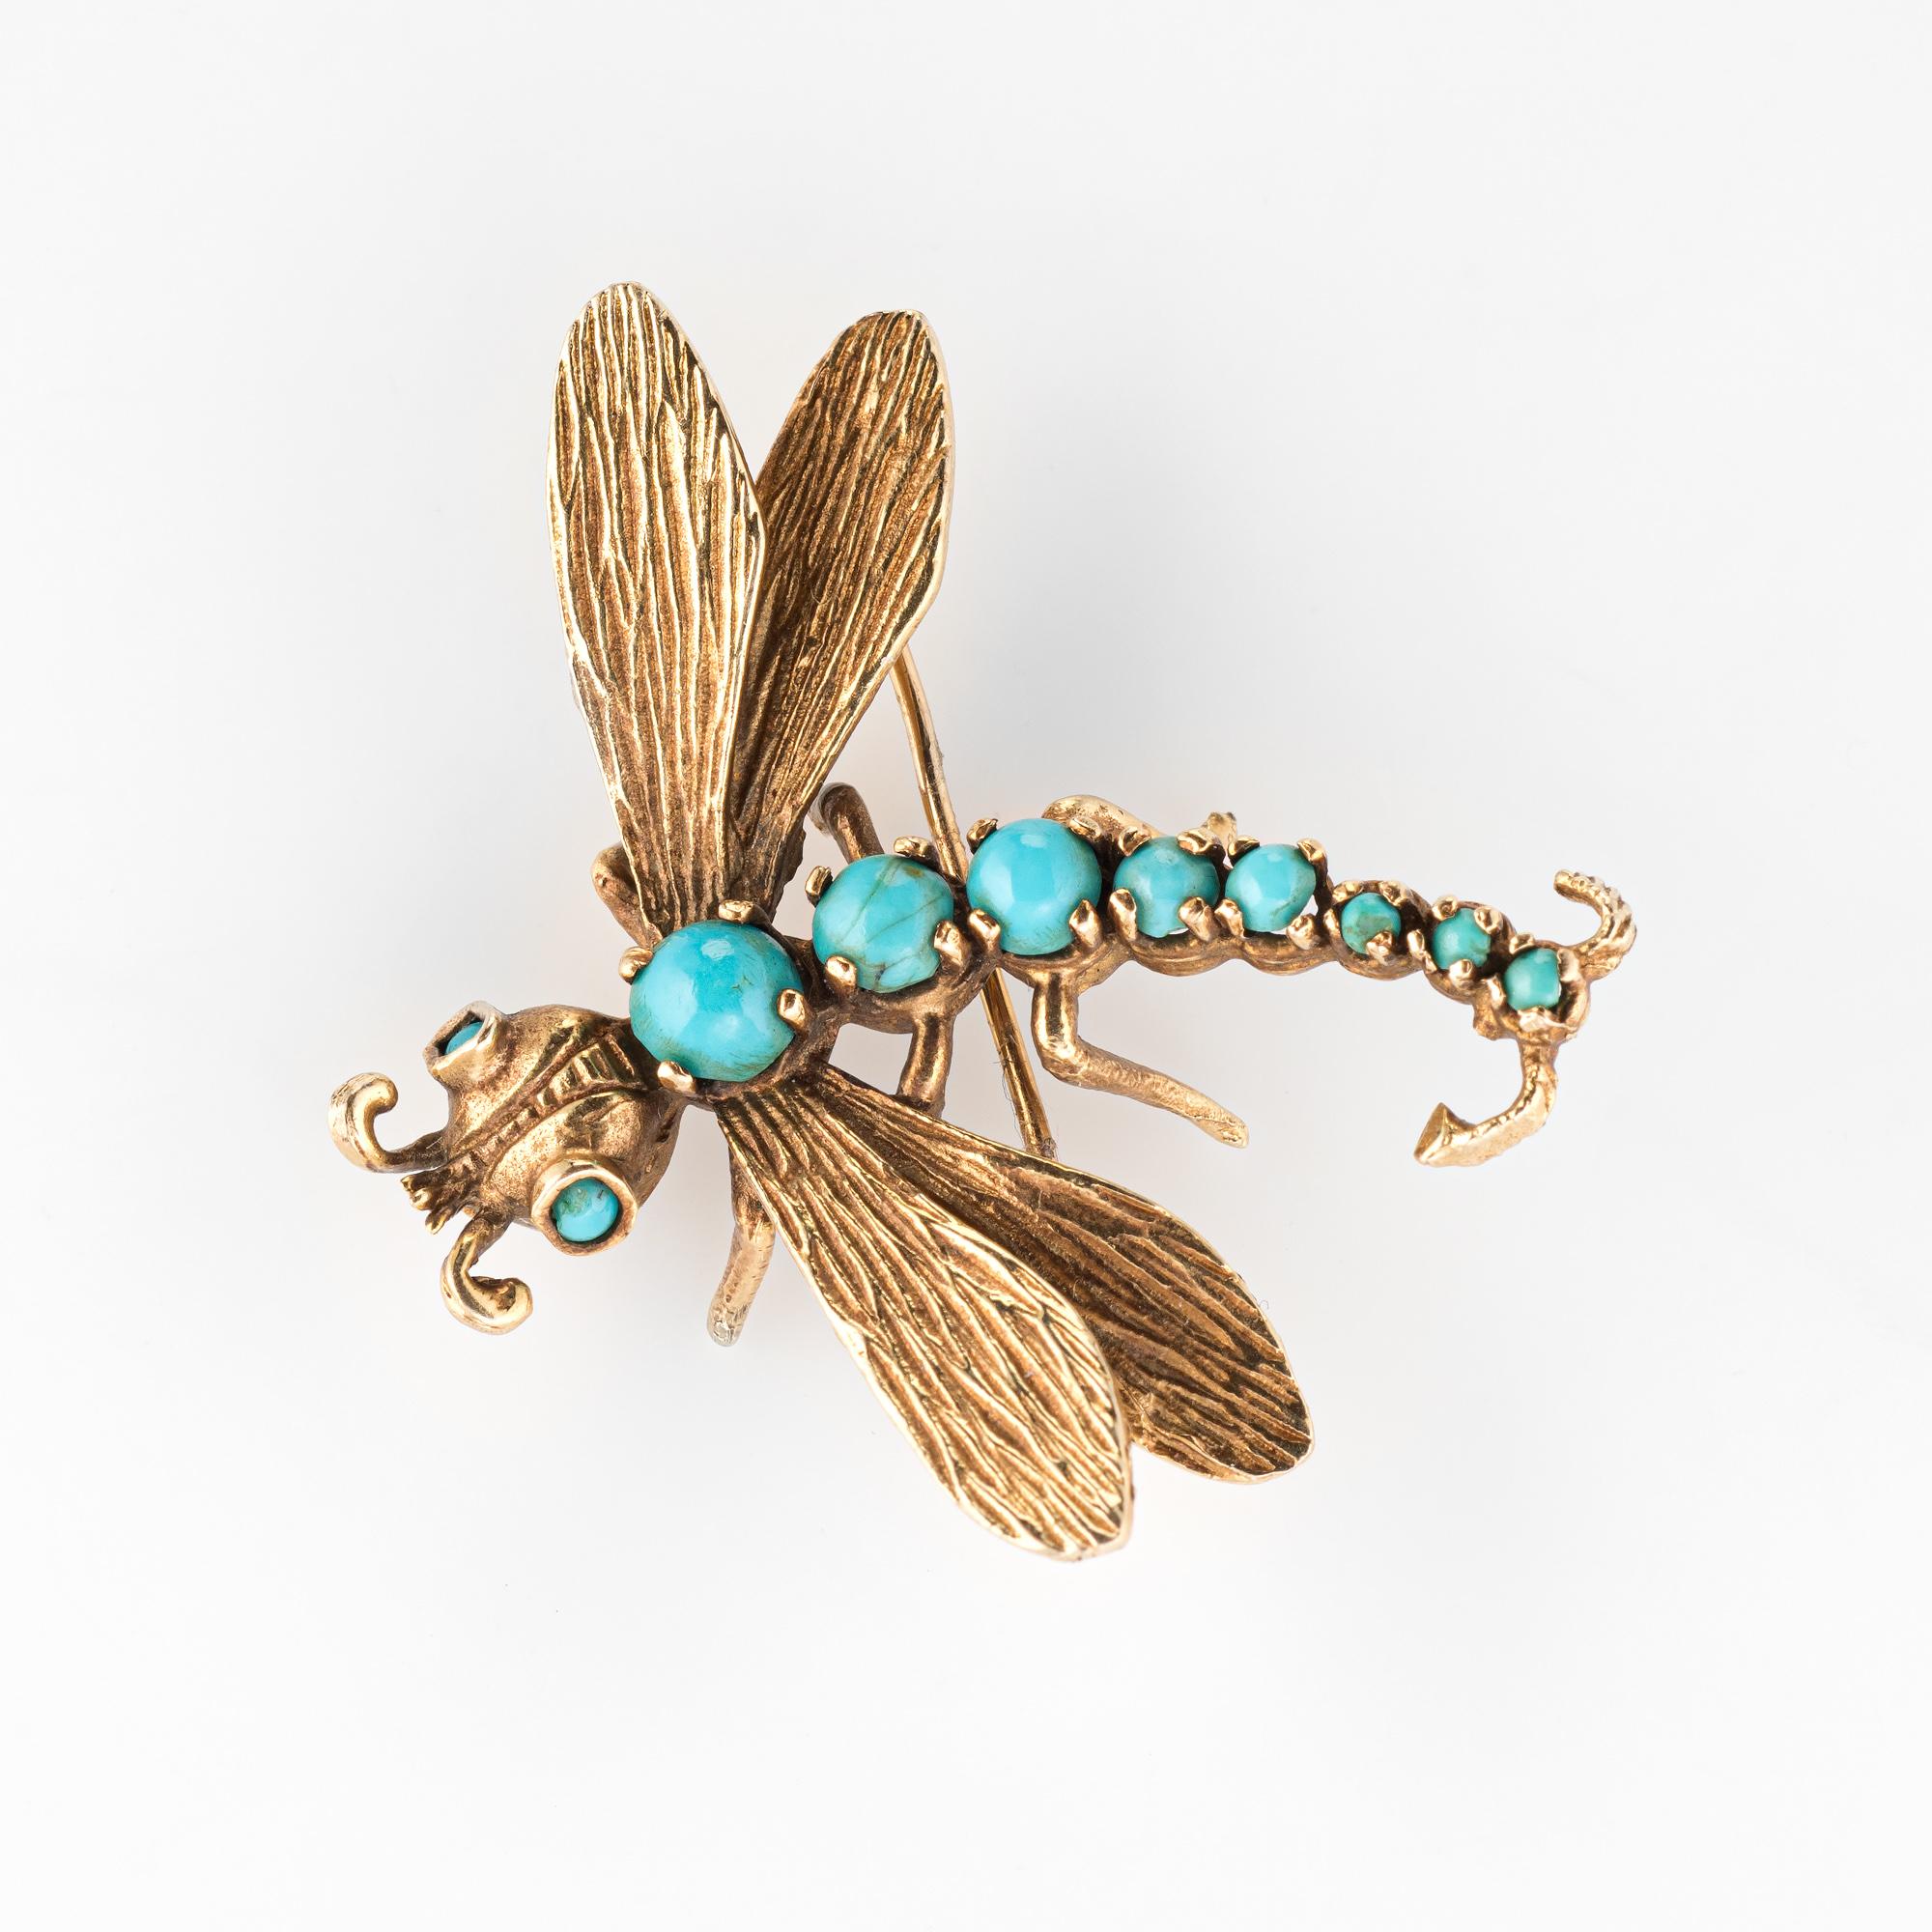 Modern Dragonfly Turquoise Brooch Vintage 14k Yellow Gold Estate Fine Jewelry Insect